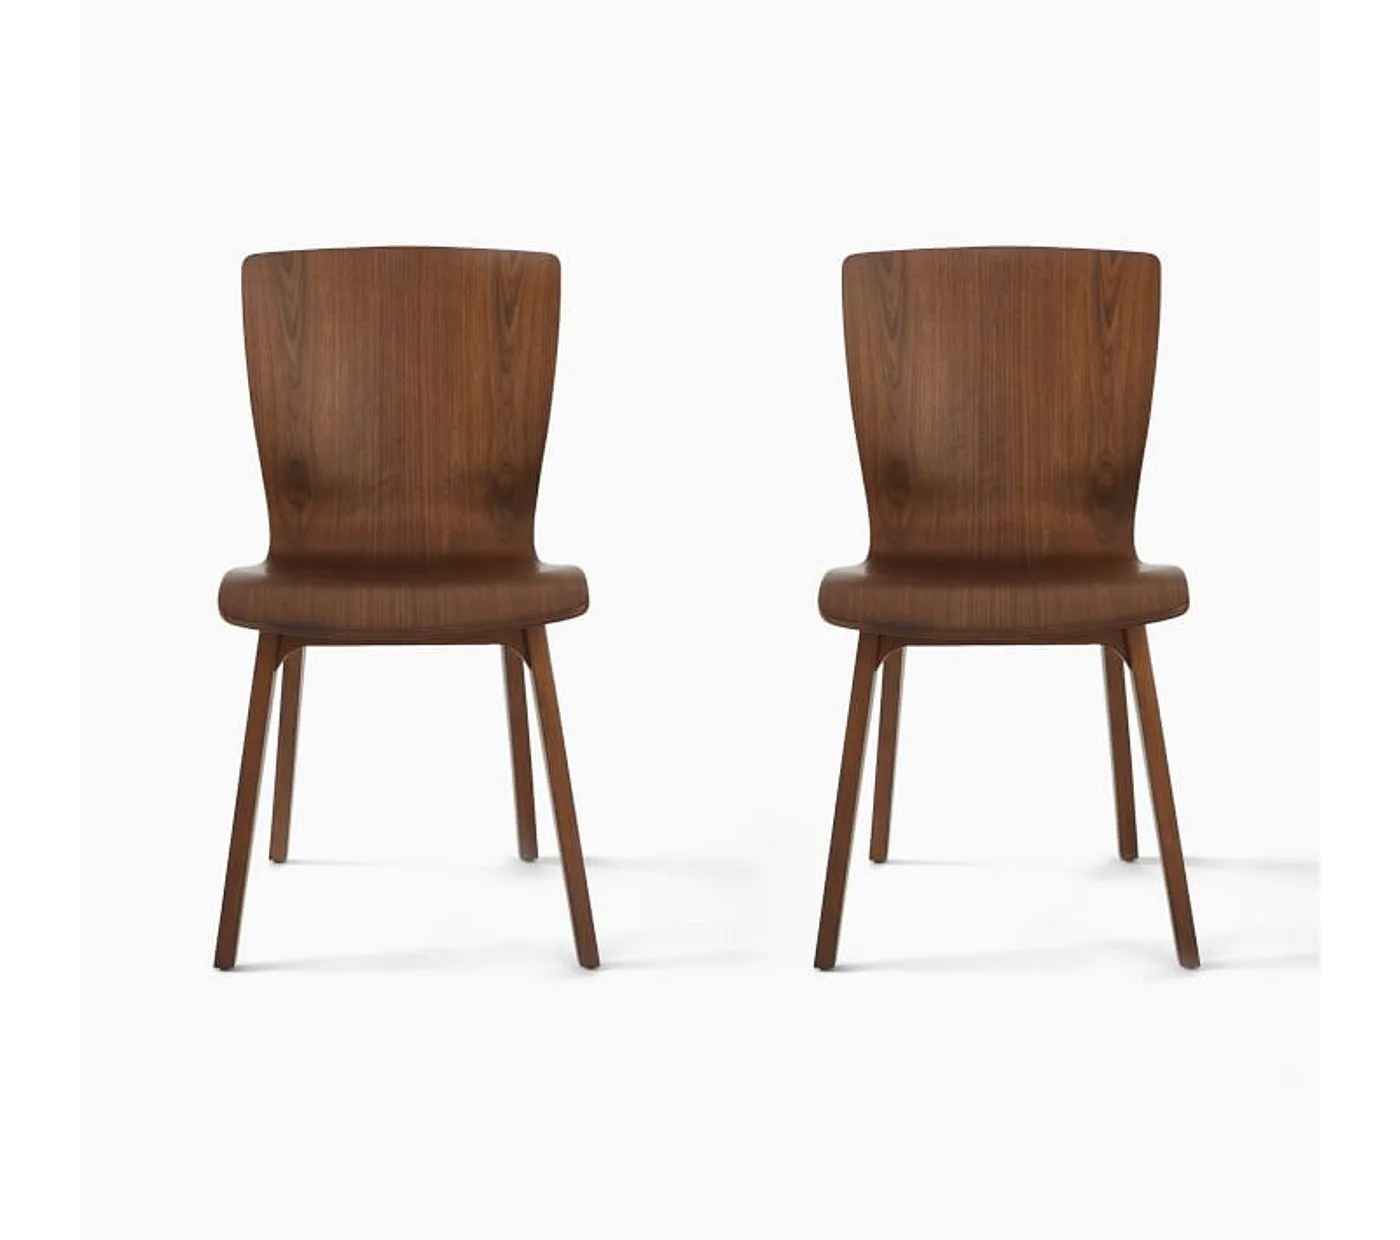 Crest Dining Chair